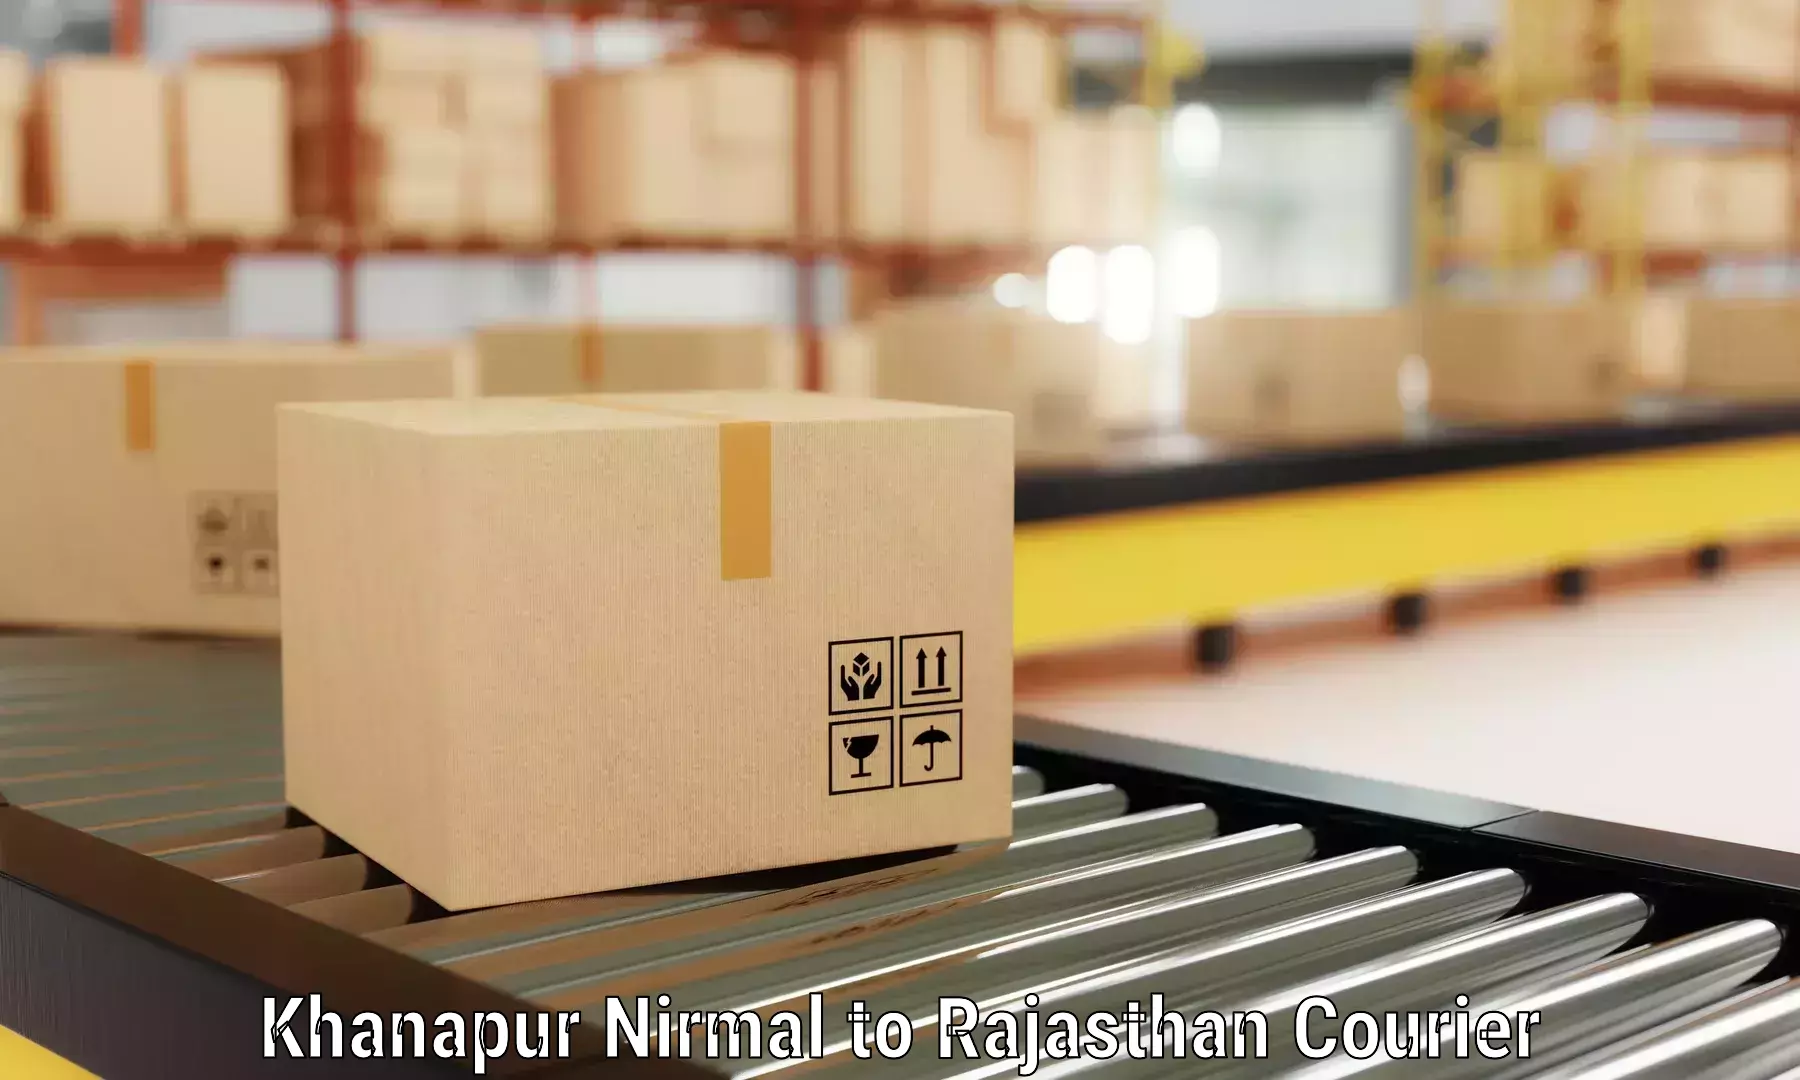 Efficient relocation services in Khanapur Nirmal to Banar